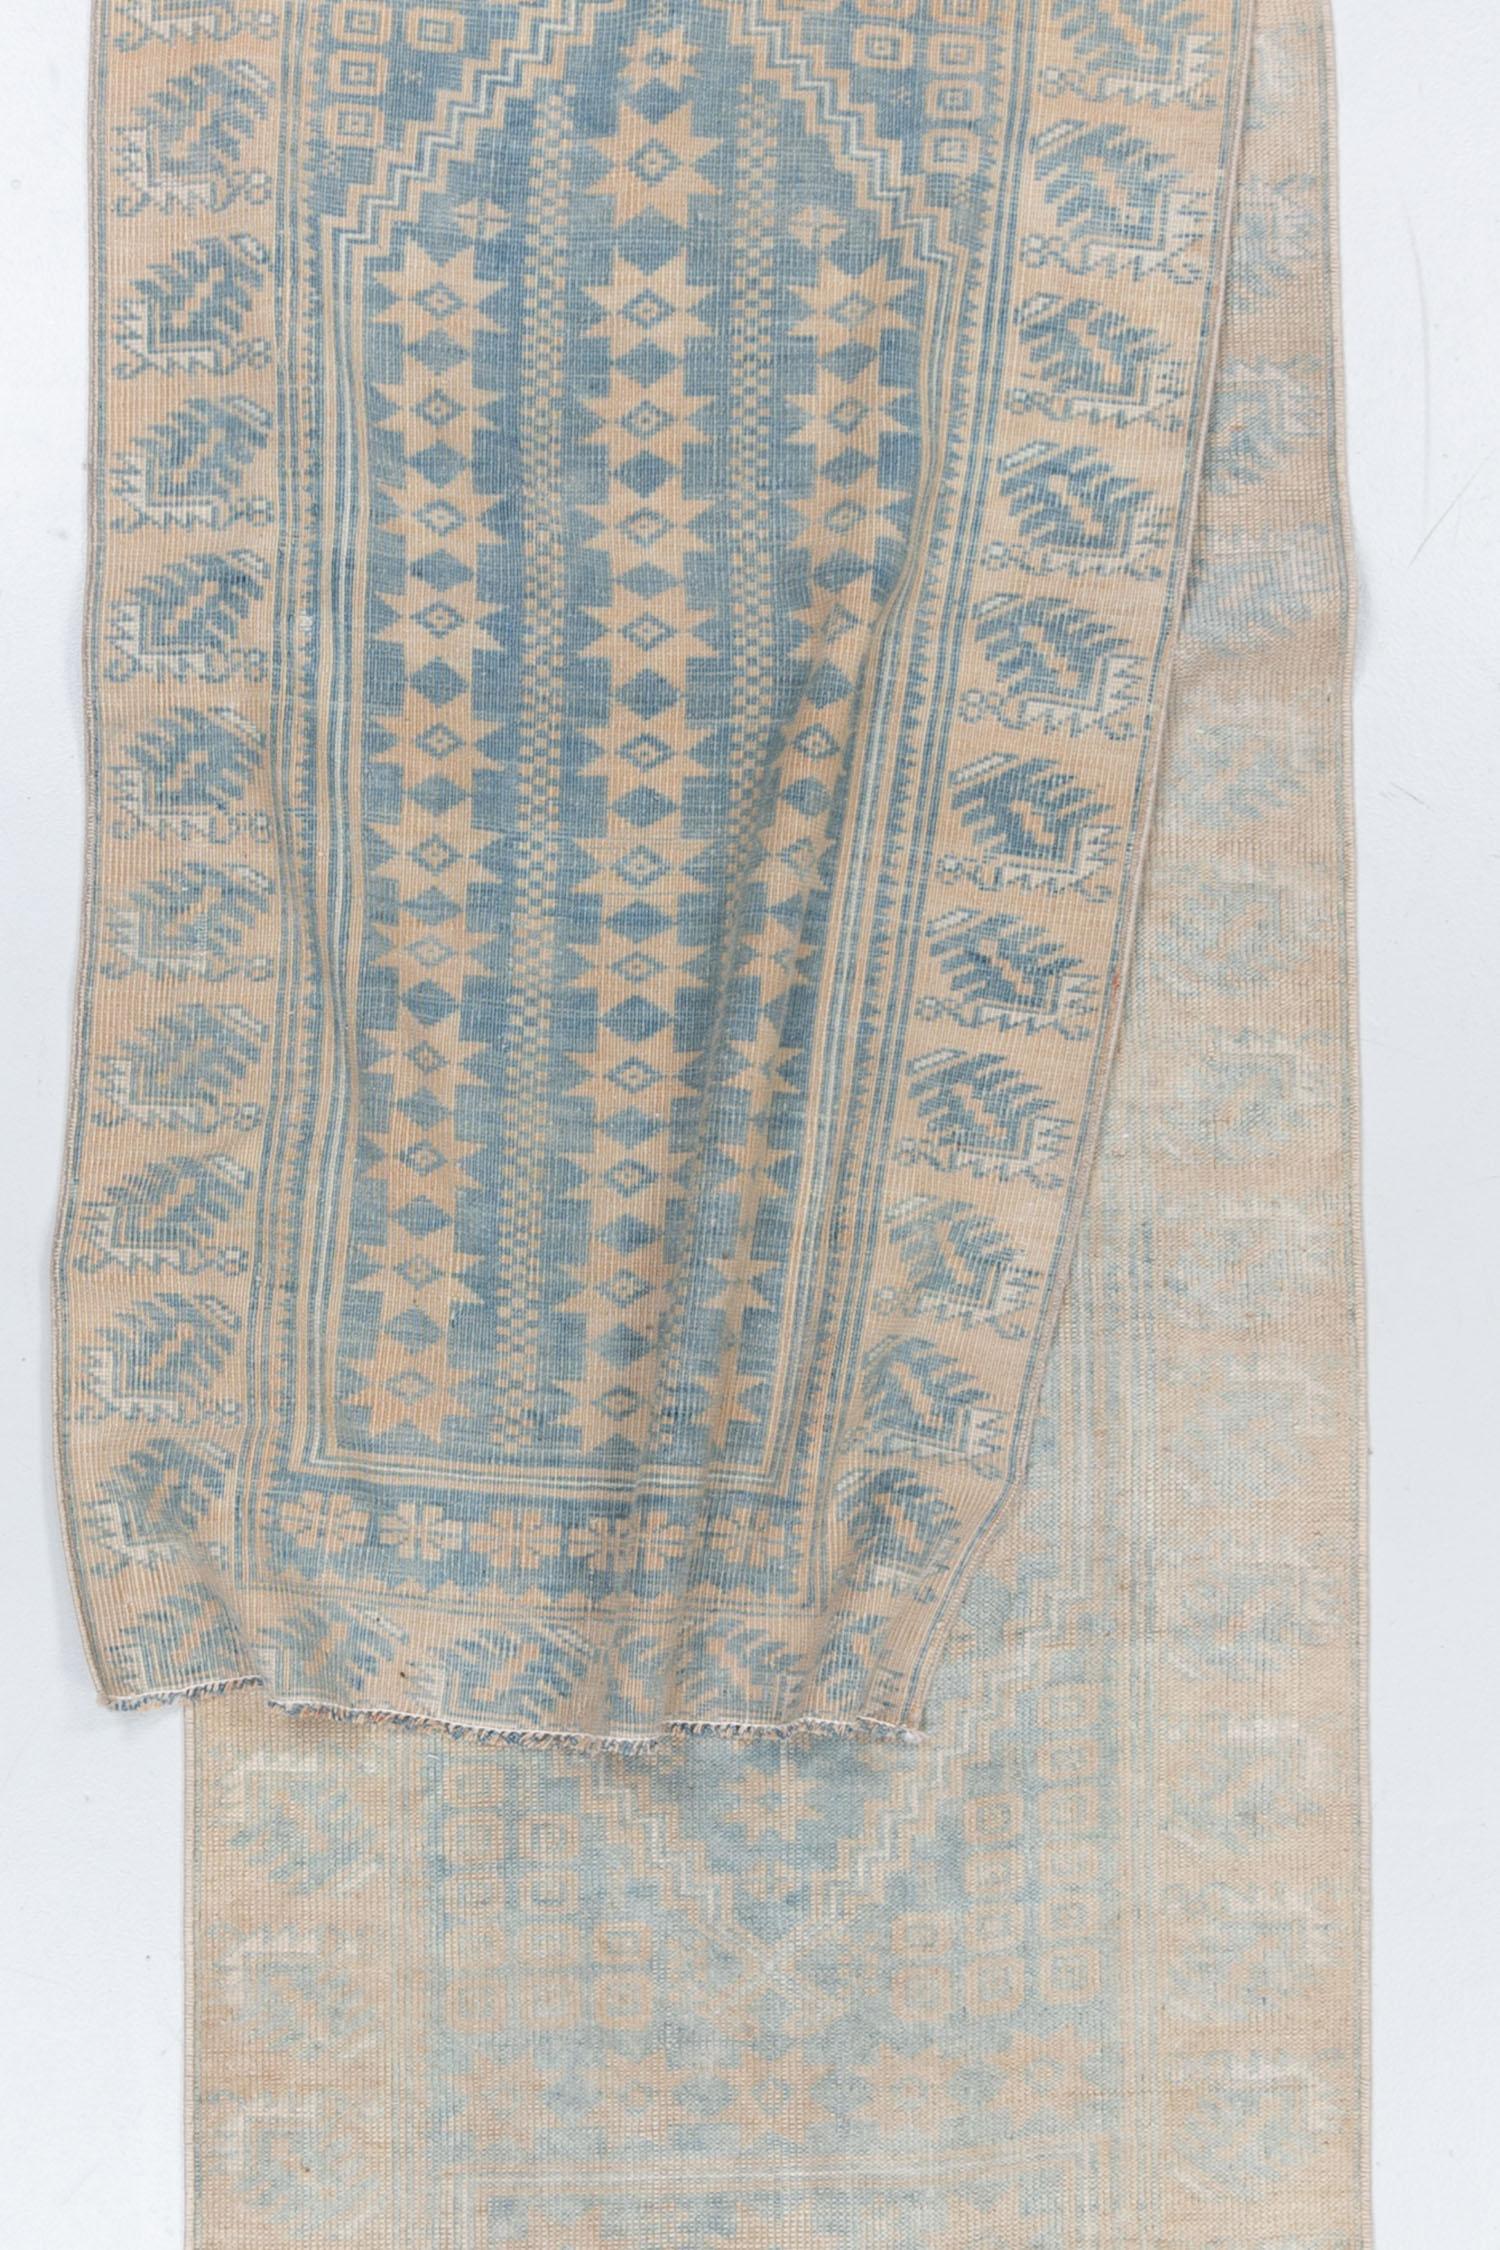 Vintage Turkish Oushak Runner Rug R2598 In Distressed Condition For Sale In West Palm Beach, FL